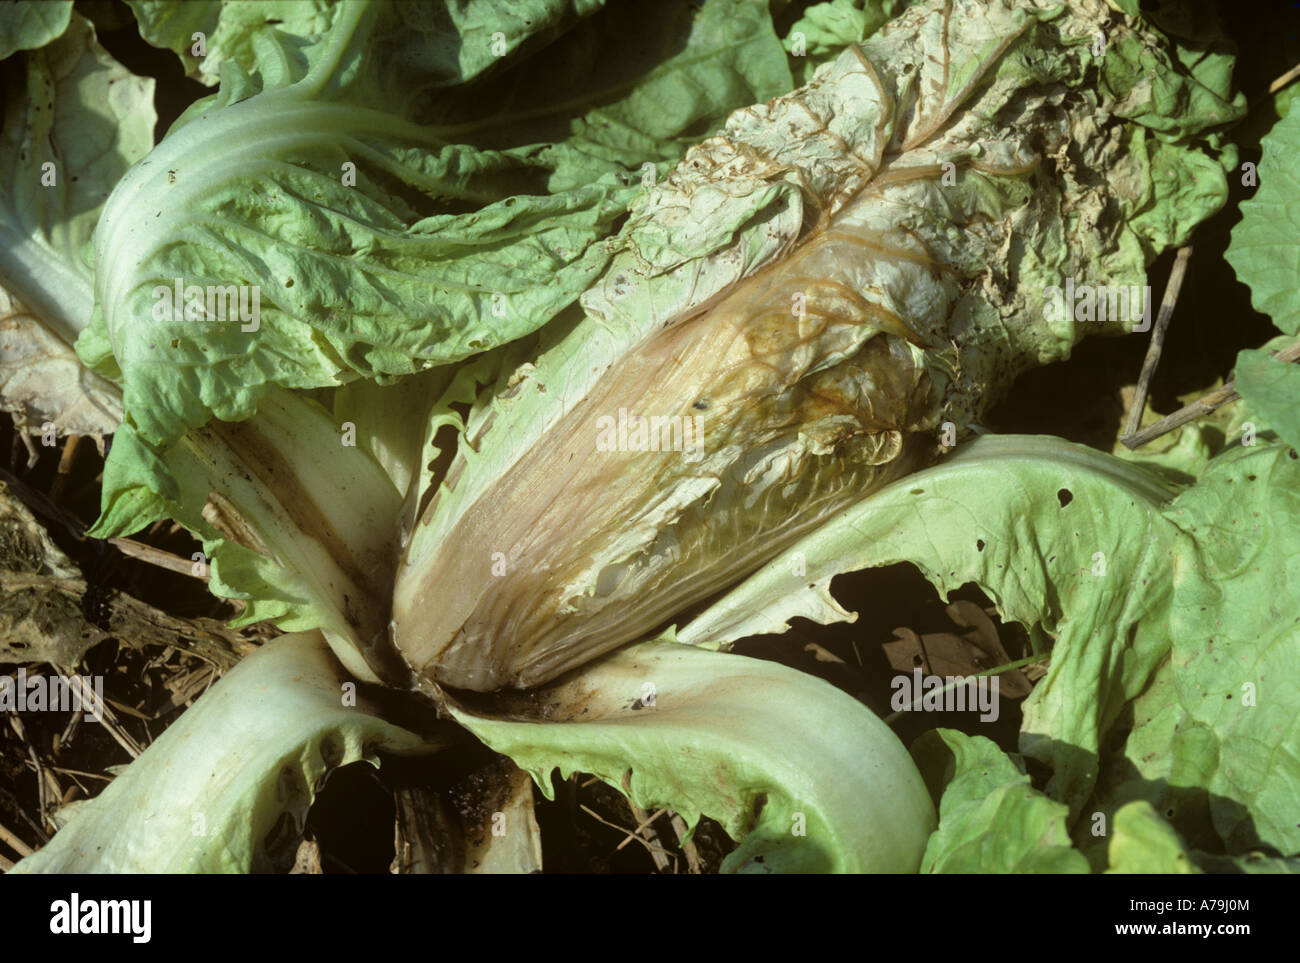 Bacterial soft rot Erwinia carotovorum on Chinese cabbage Thailand Stock Photo